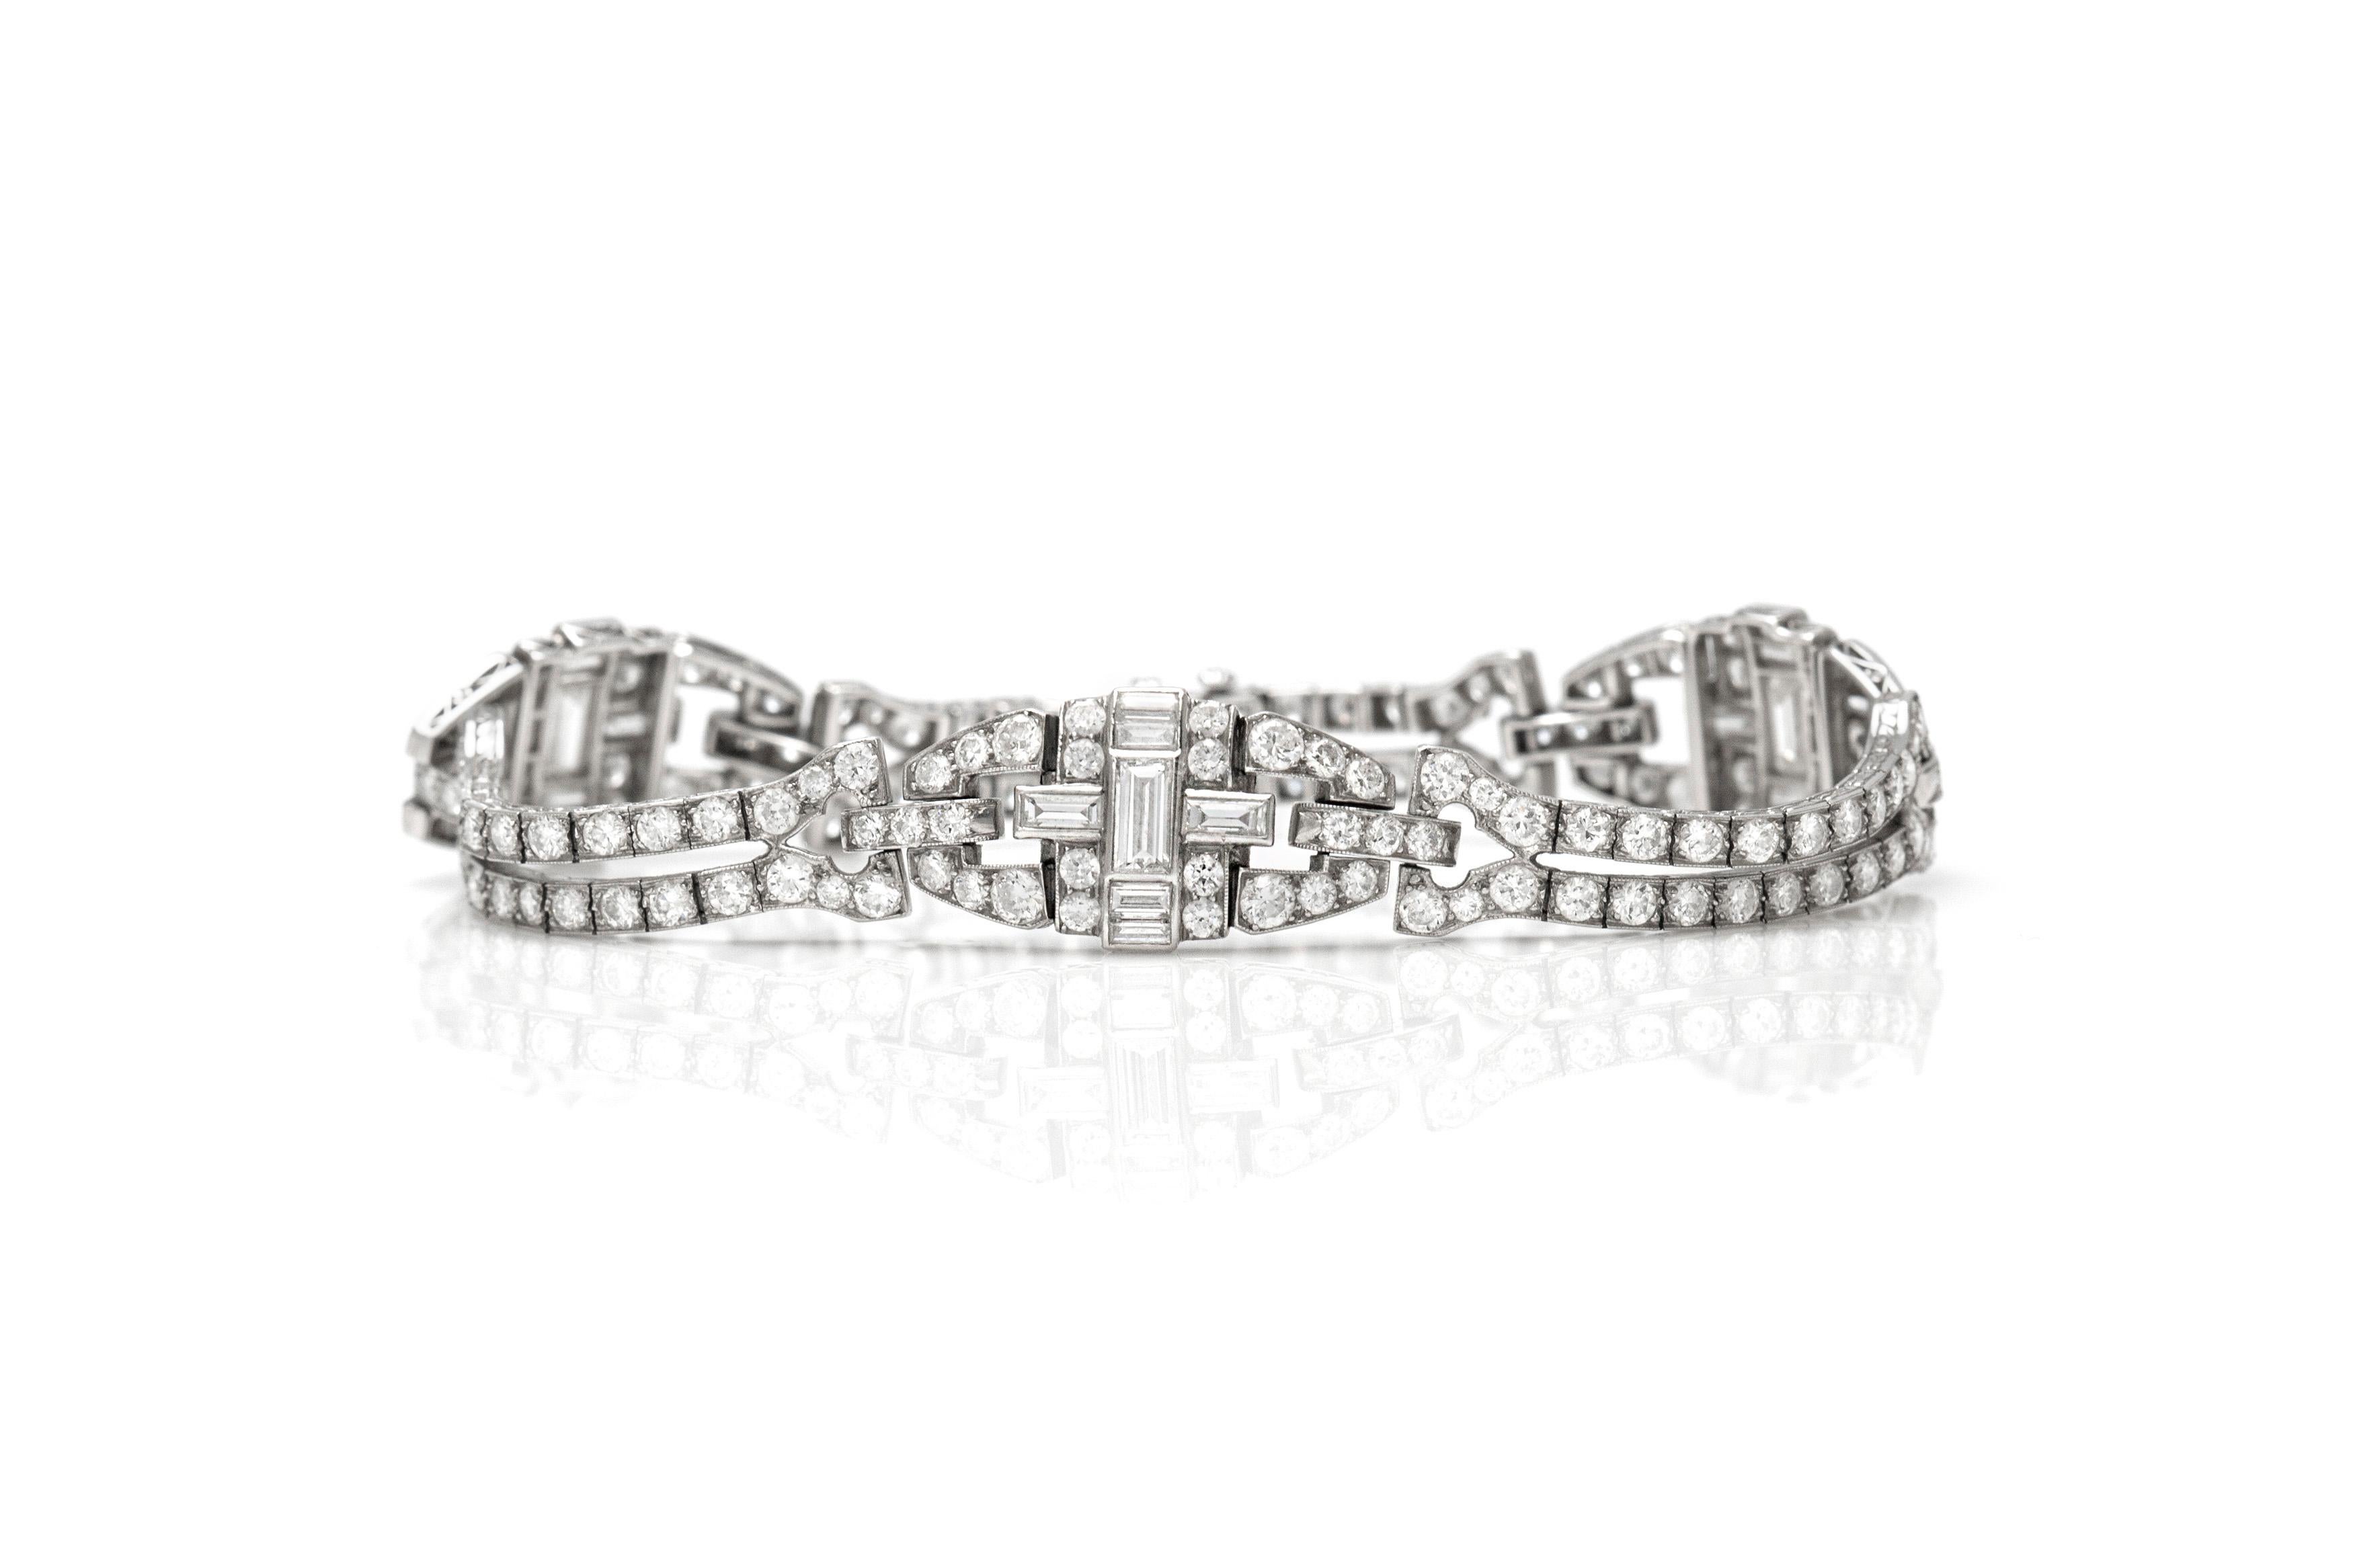 Oscar Heyman bracelet is finely crafted in platinum.
The diamonds weigh an approximate of 10.00 CT.
Stunning delicate bracelet circa 1920s is a must have for any woman. 